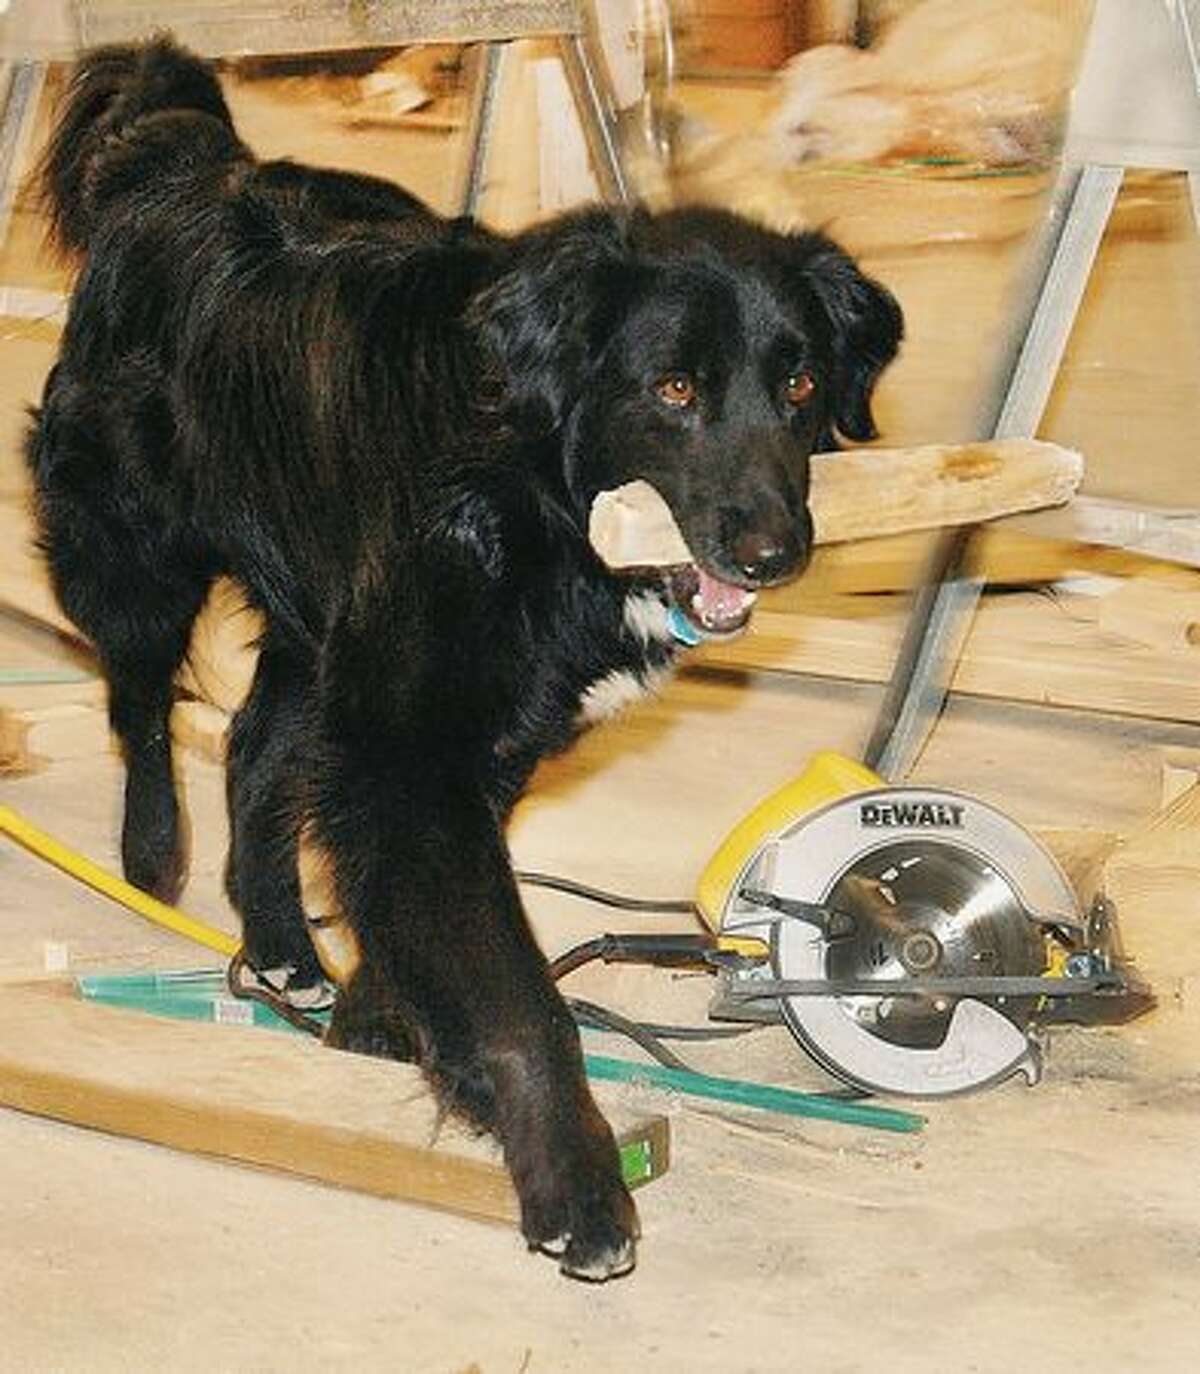 Chevy, the job site dog, is working hard Monday afternoon, April 12, 2010 keeping the Exhibit Hall work area at the fairgrounds in Miles City, Mont., free of stray sticks and piling them up in a convenient location near tools. Being an independent contract dog, Chevy is more then willing to prove his work ethic by bringing back any stick you throw. (AP Photo/Steve Allison/Miles City Star)